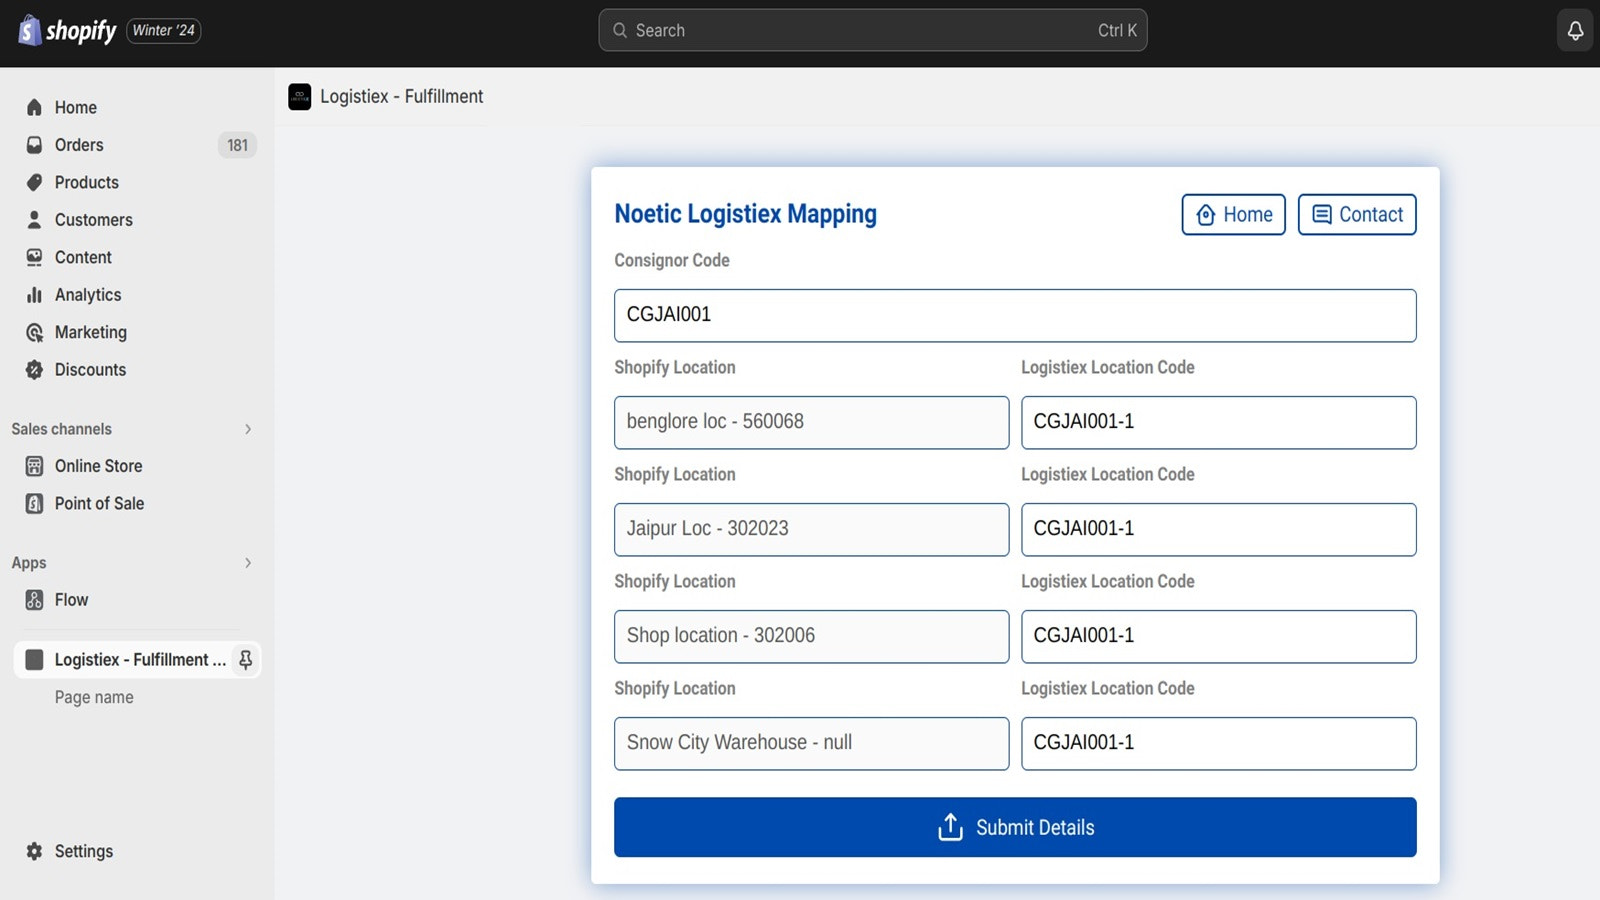 Enter requested details as registered with Noetic Logistiex